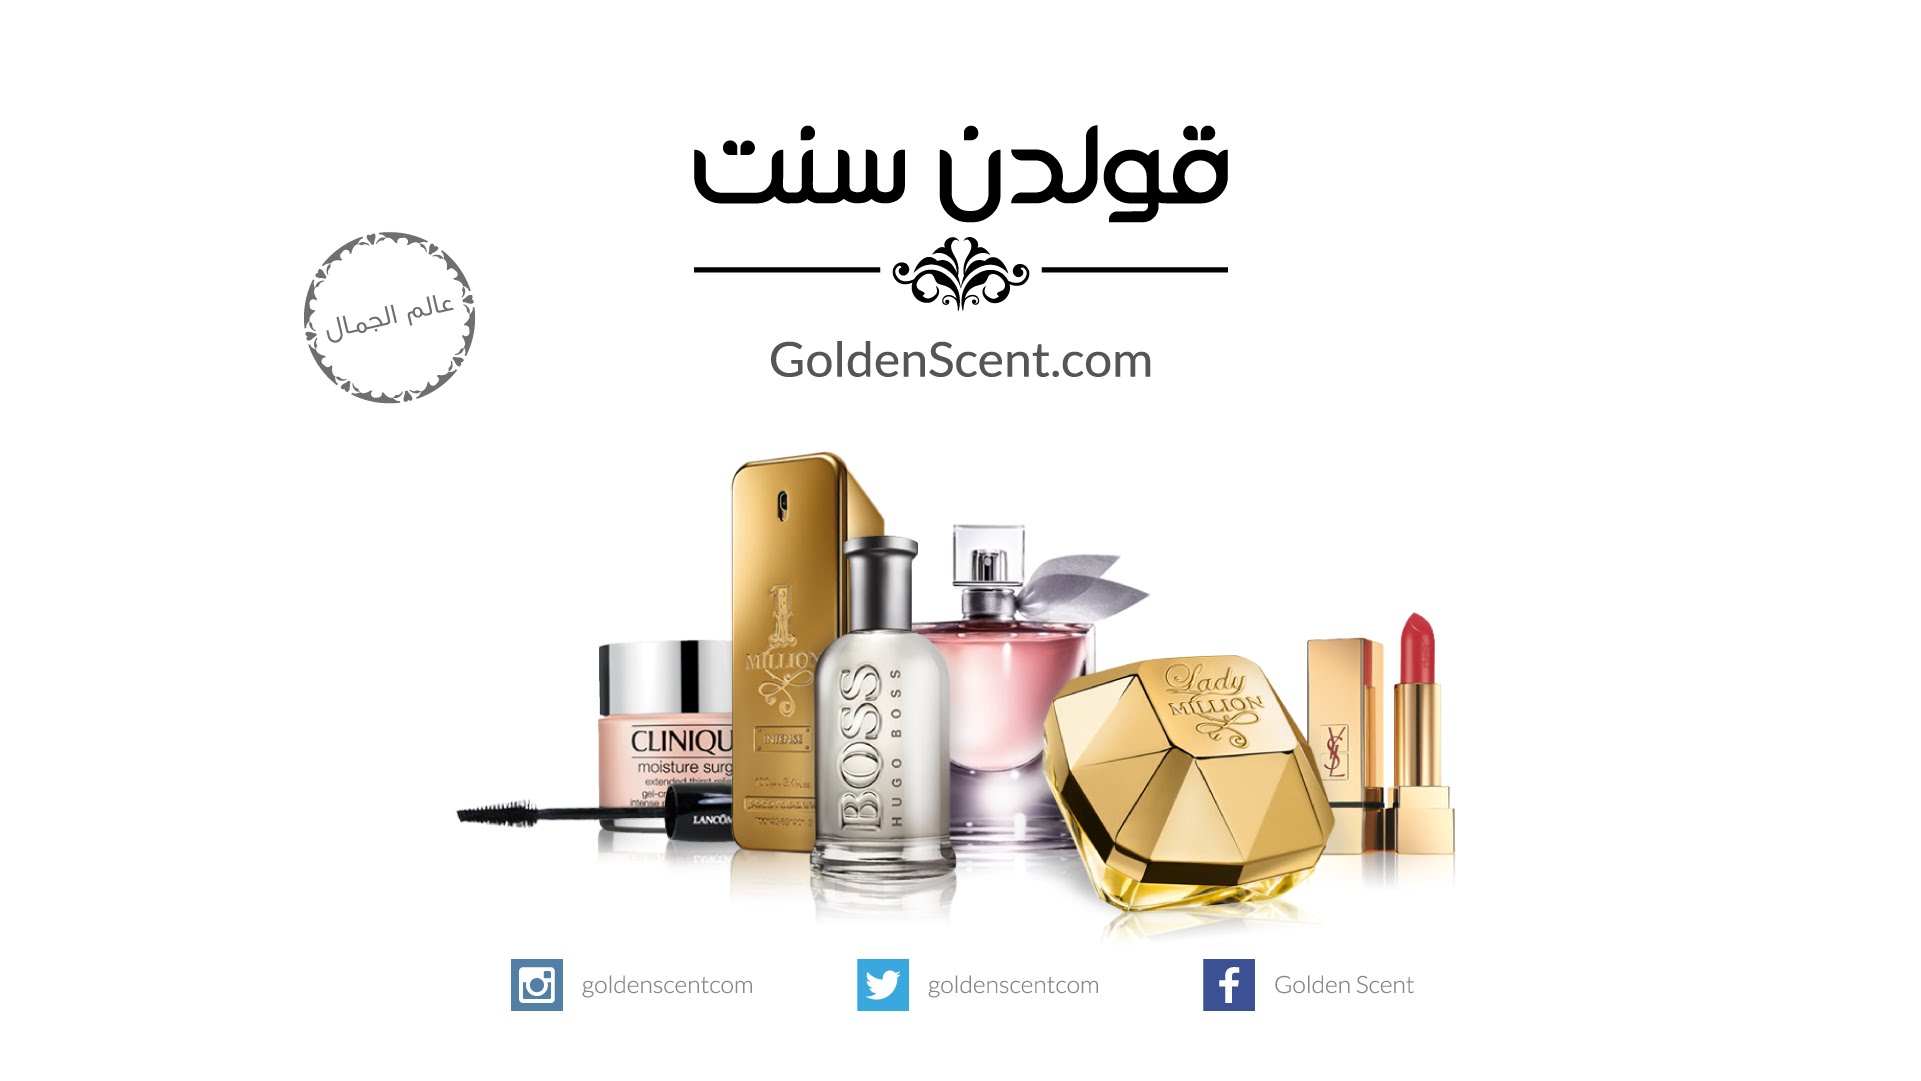 Golden Scent Plans To Expand To Diversify Their Operations, 50% OFF